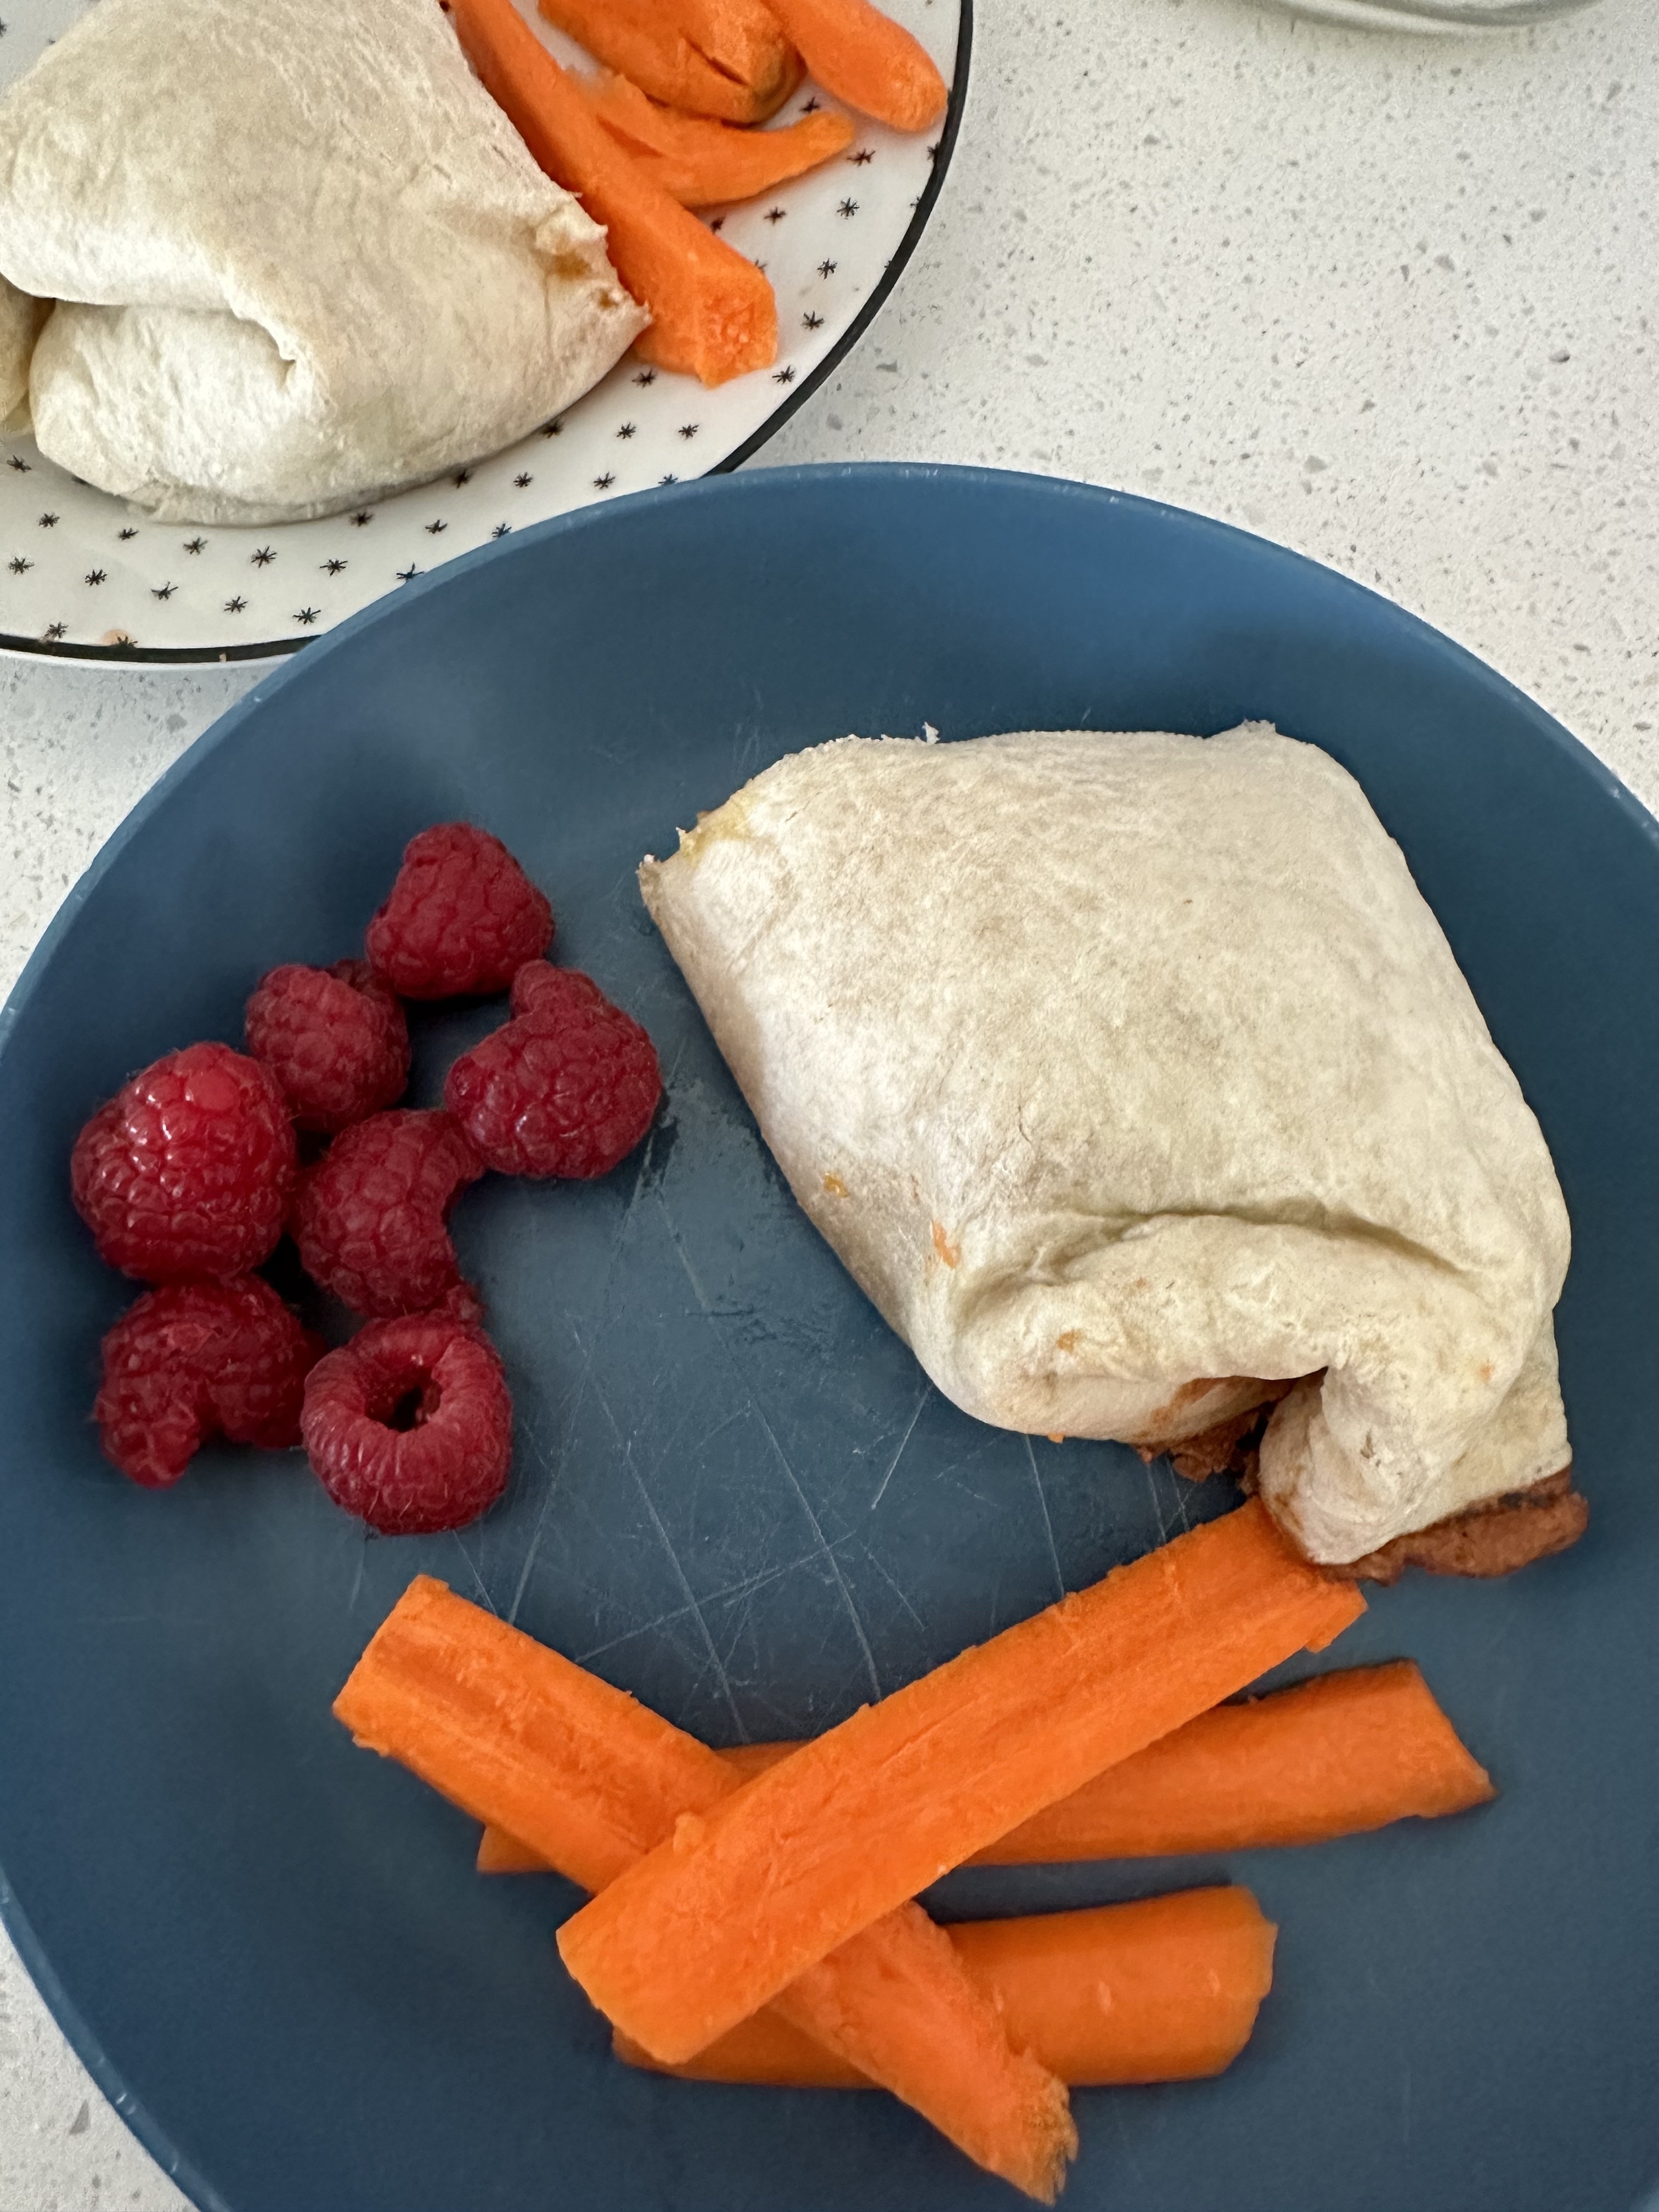 raspberries, carrots, and a burrito on a plate